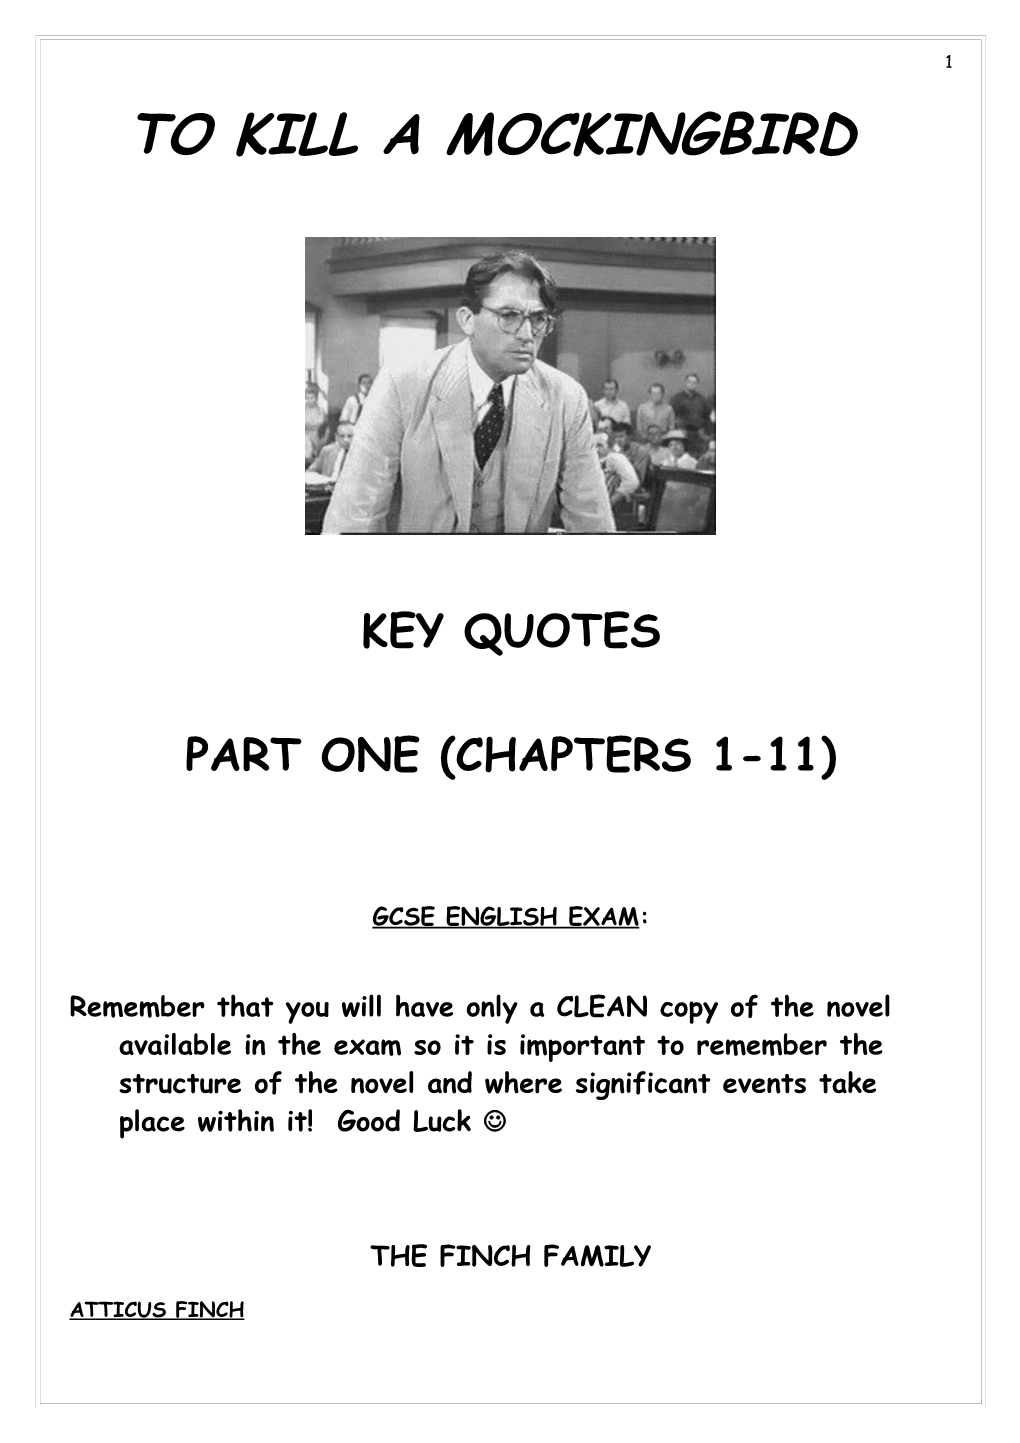 To Kill A Mockingbird By Harper Lee - Key Quotes